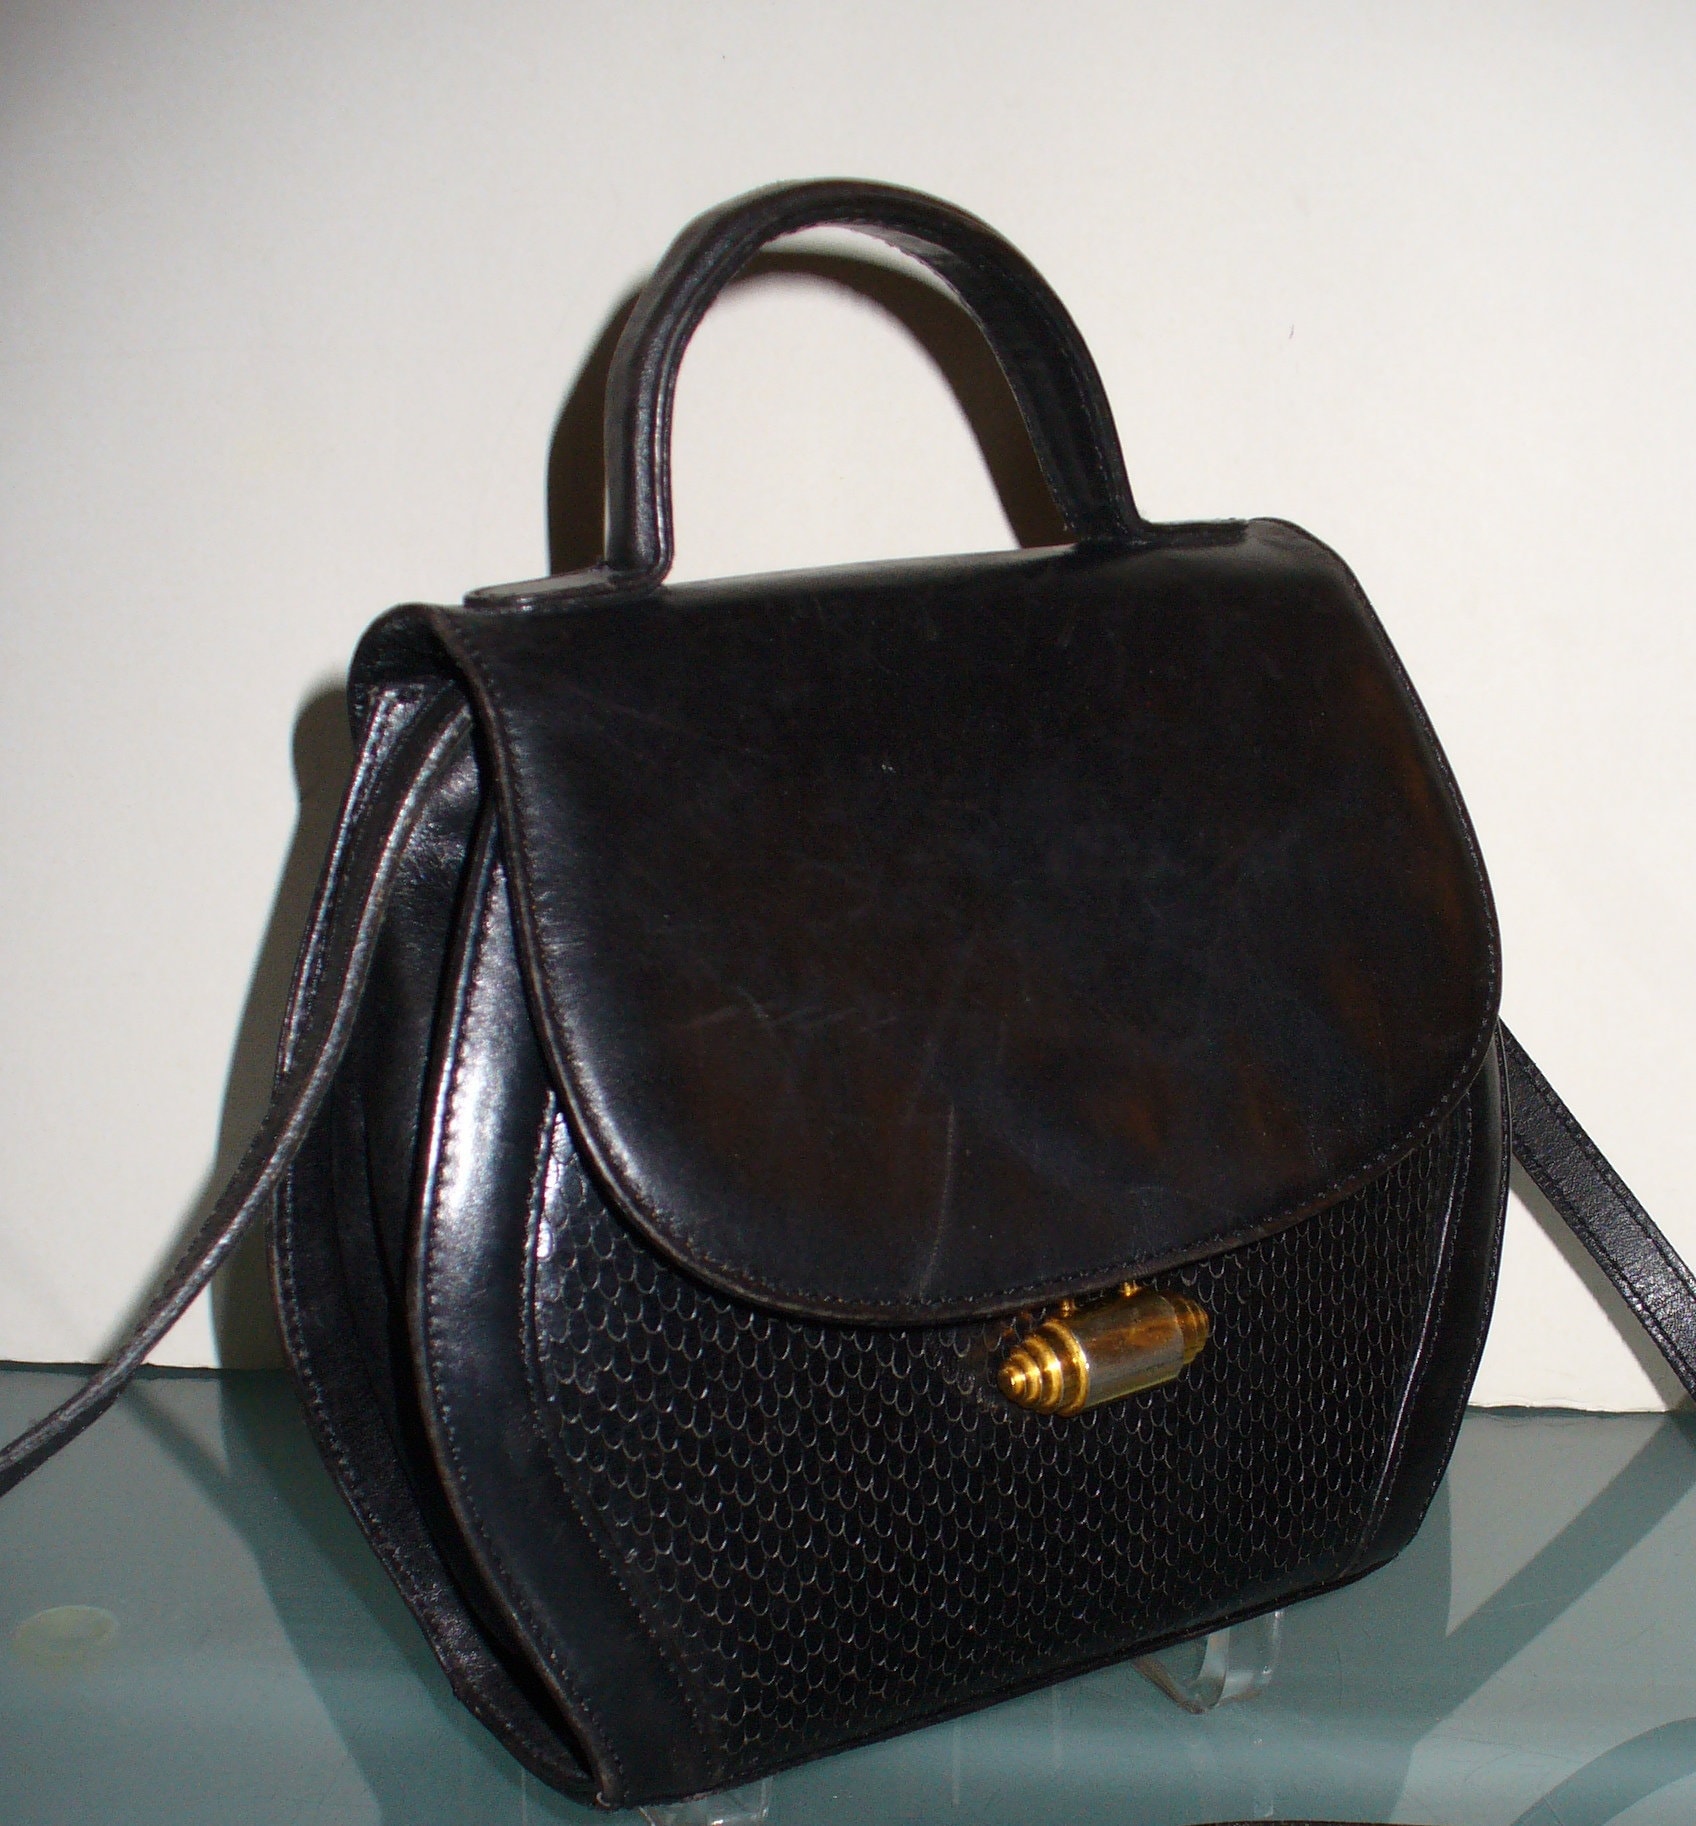 Perry Leather Shoulder Bag